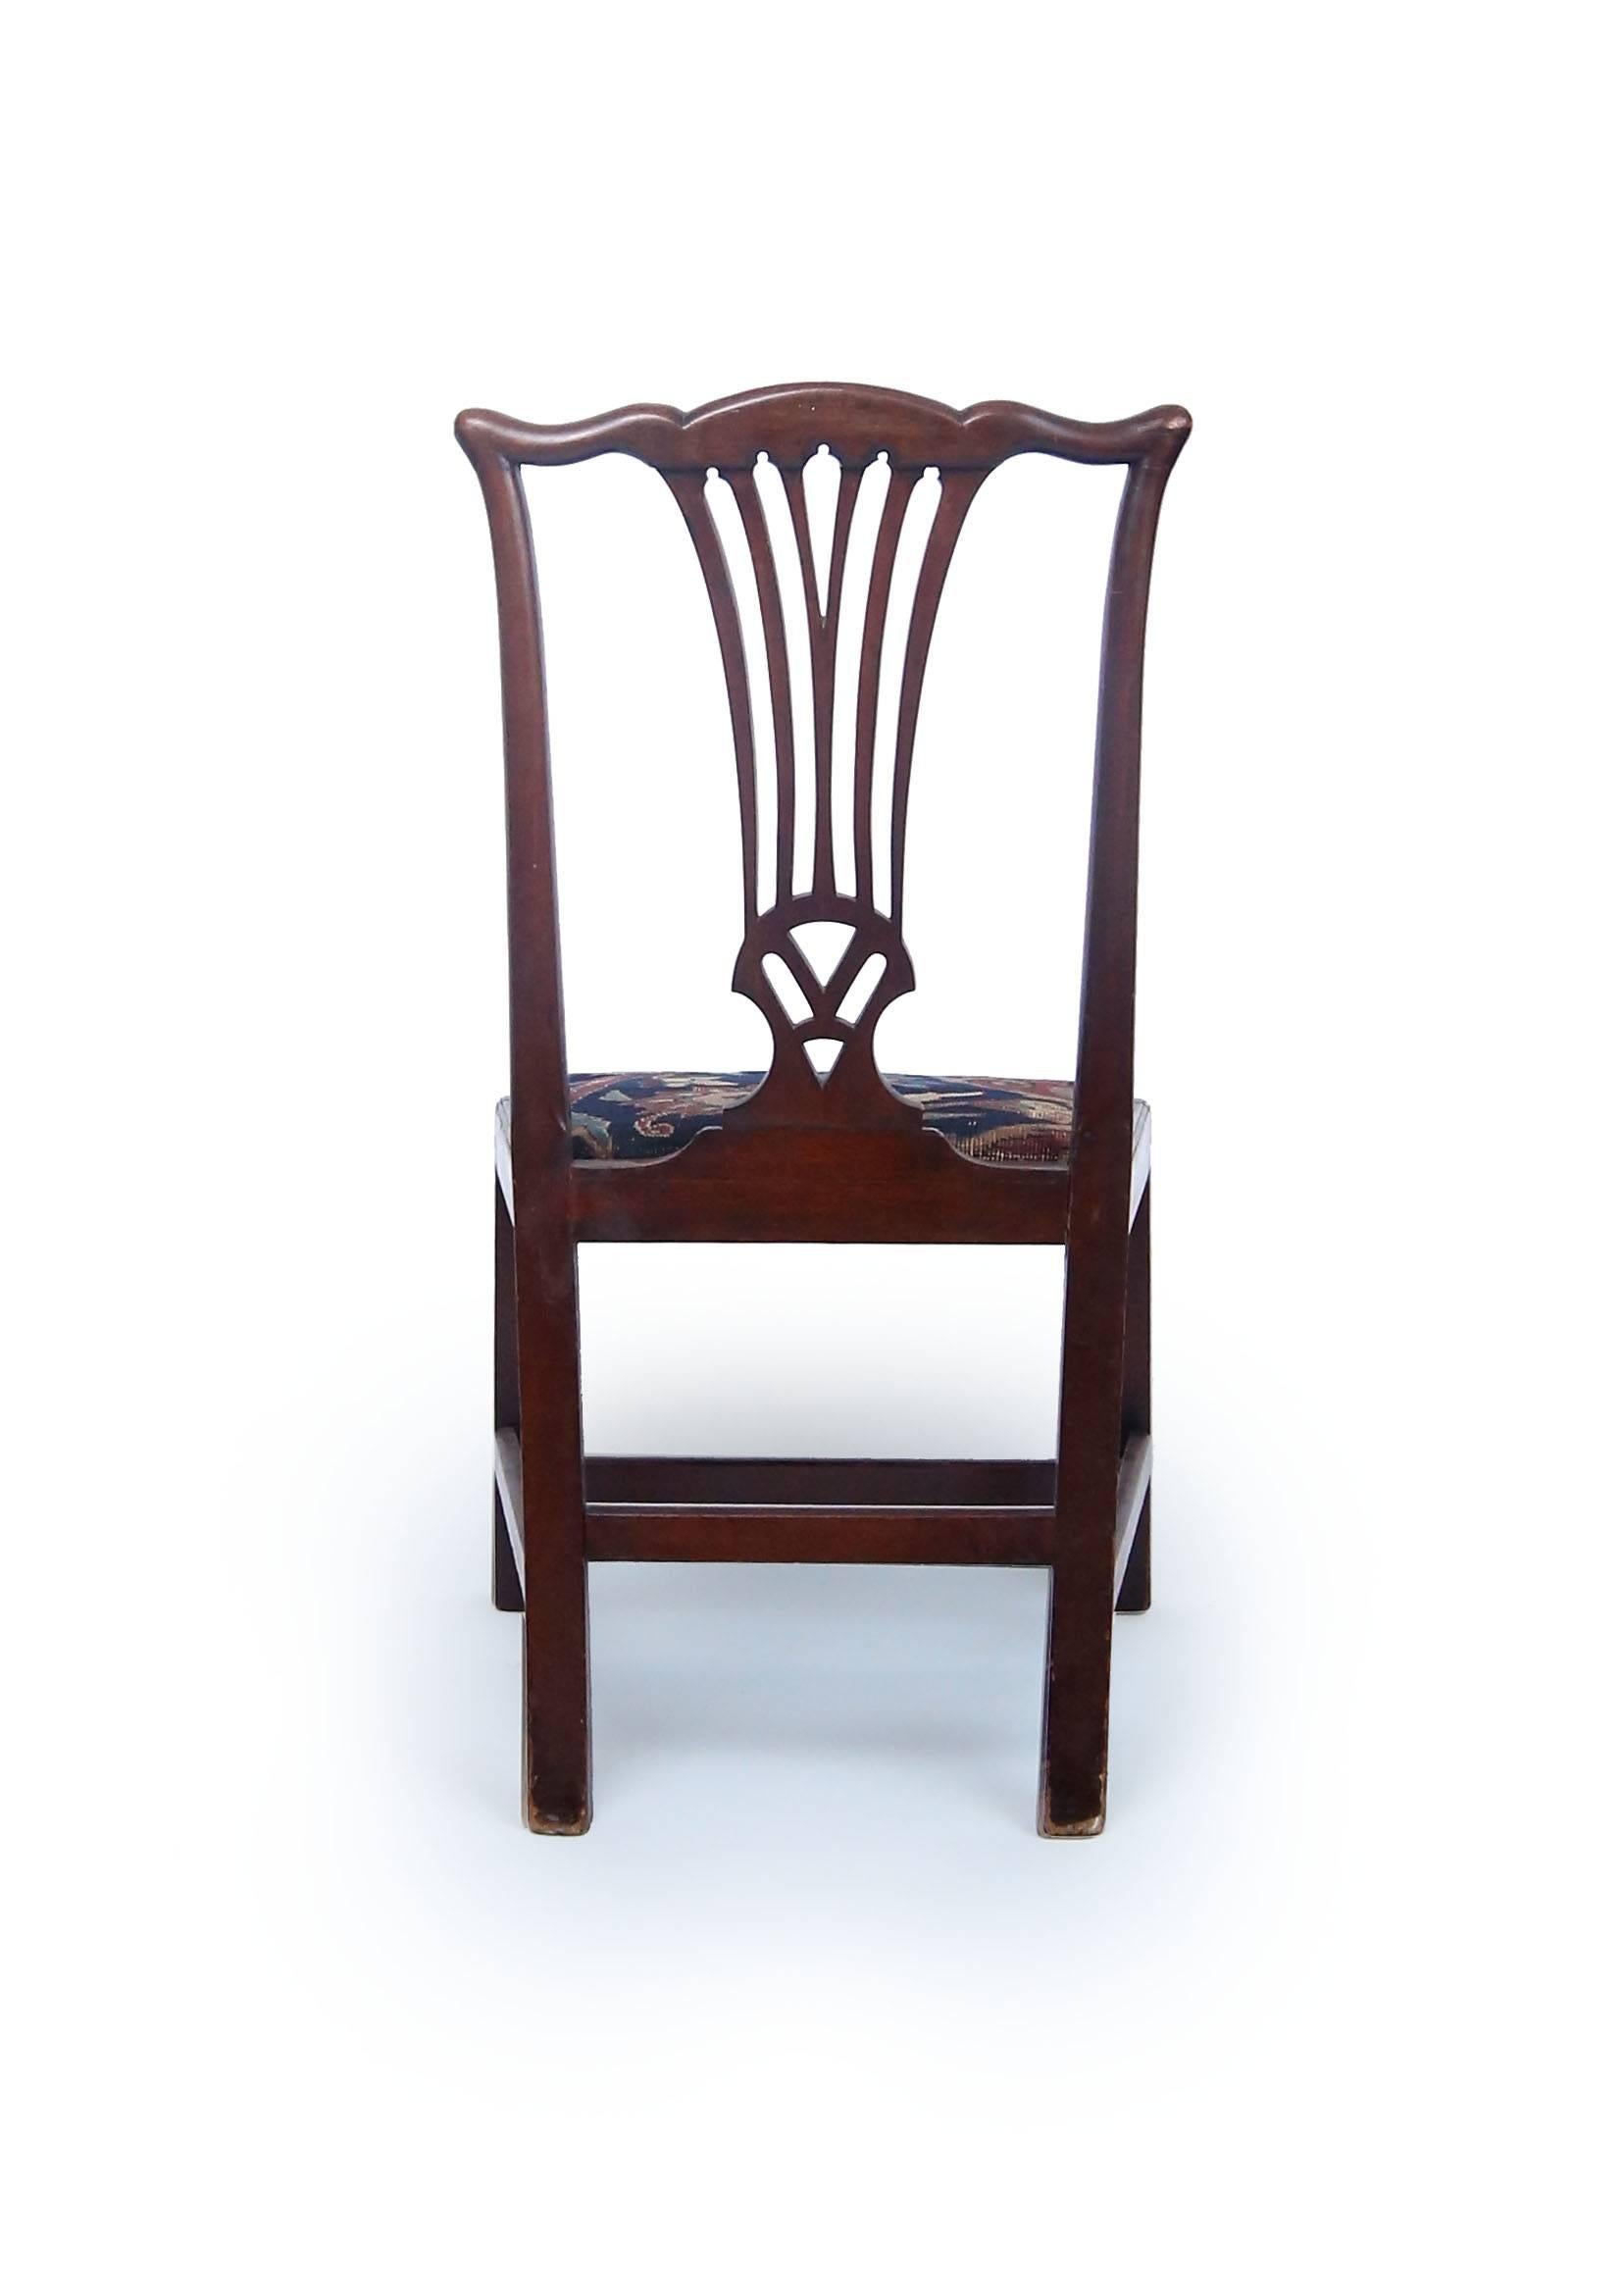 Mid-18th Century American Walnut Chippendale Chairs with Oushak Seats 1